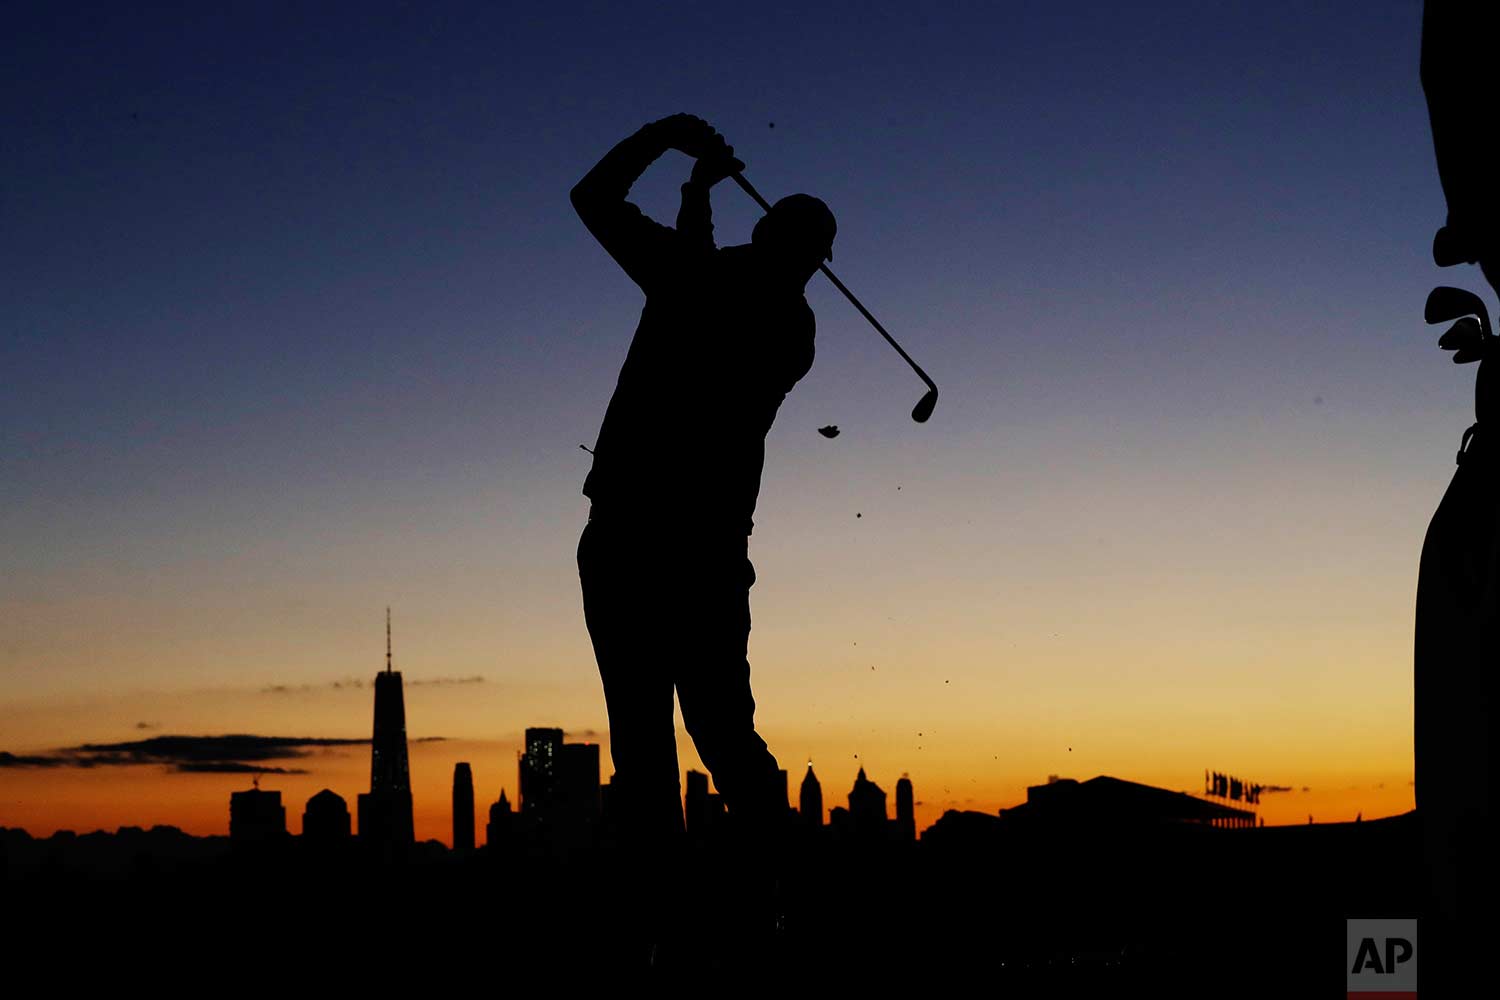  Marc Leishman practices on the driving range before the start of play during the third day of the Presidents Cup at Liberty National Golf Club in Jersey City, N.J., Saturday, Sept. 30, 2017. (AP Photo/Julio Cortez) 